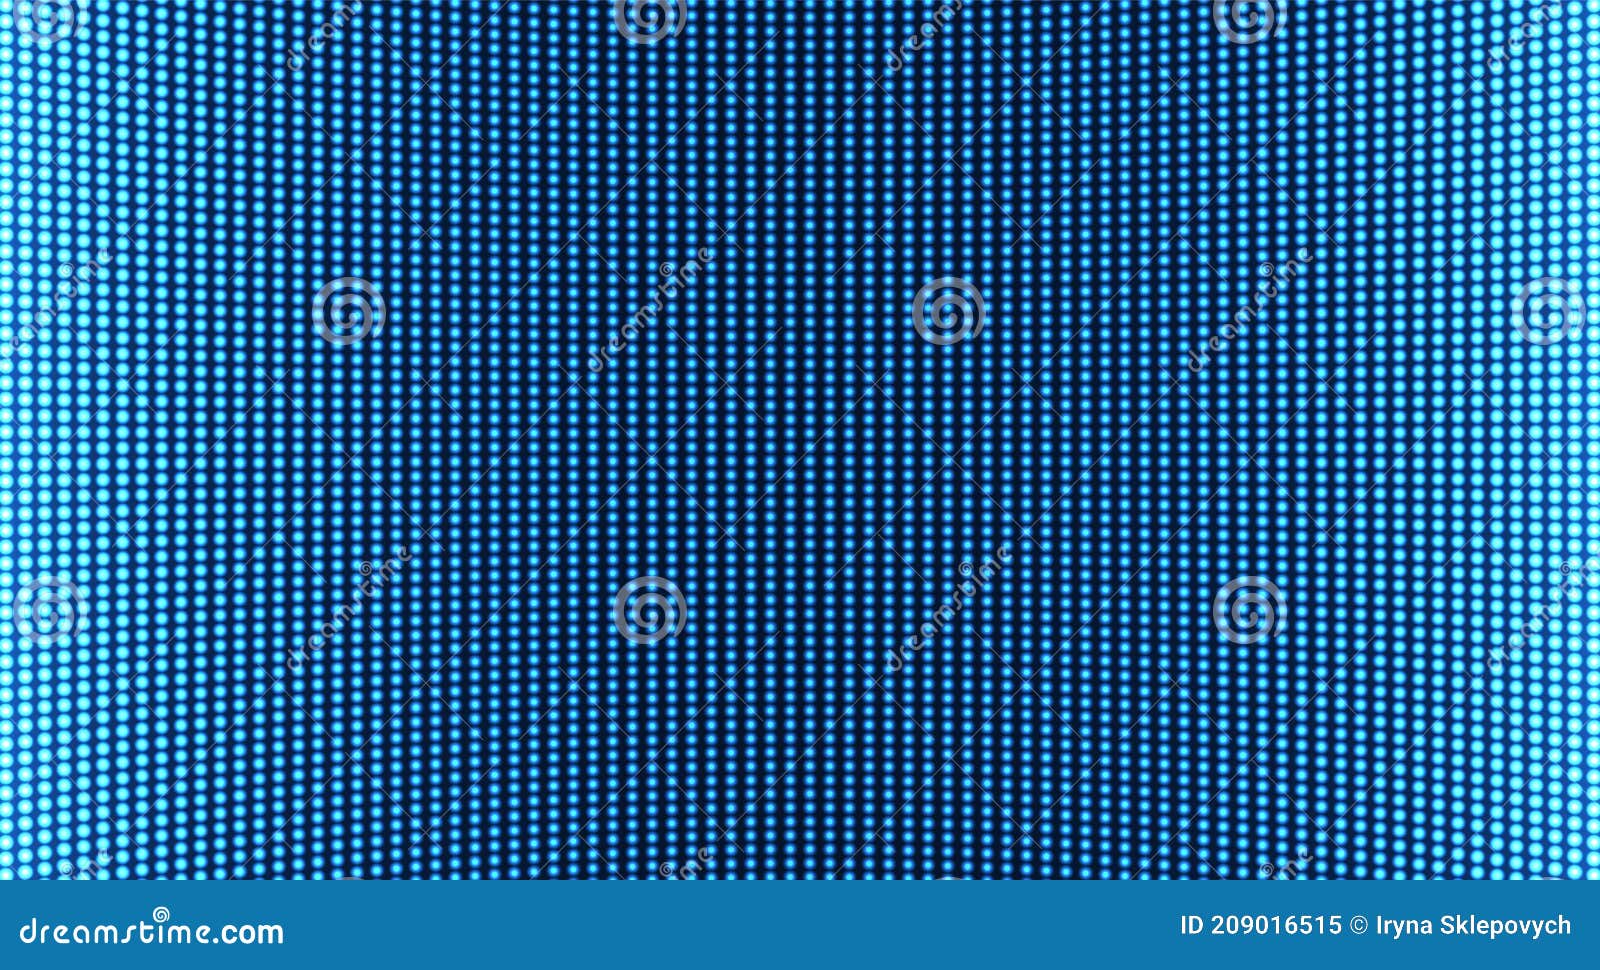 https://thumbs.dreamstime.com/z/led-screen-texture-lcd-display-dots-digital-pixel-monitor-vector-illustration-electronic-diode-effect-blue-videowall-209016515.jpg